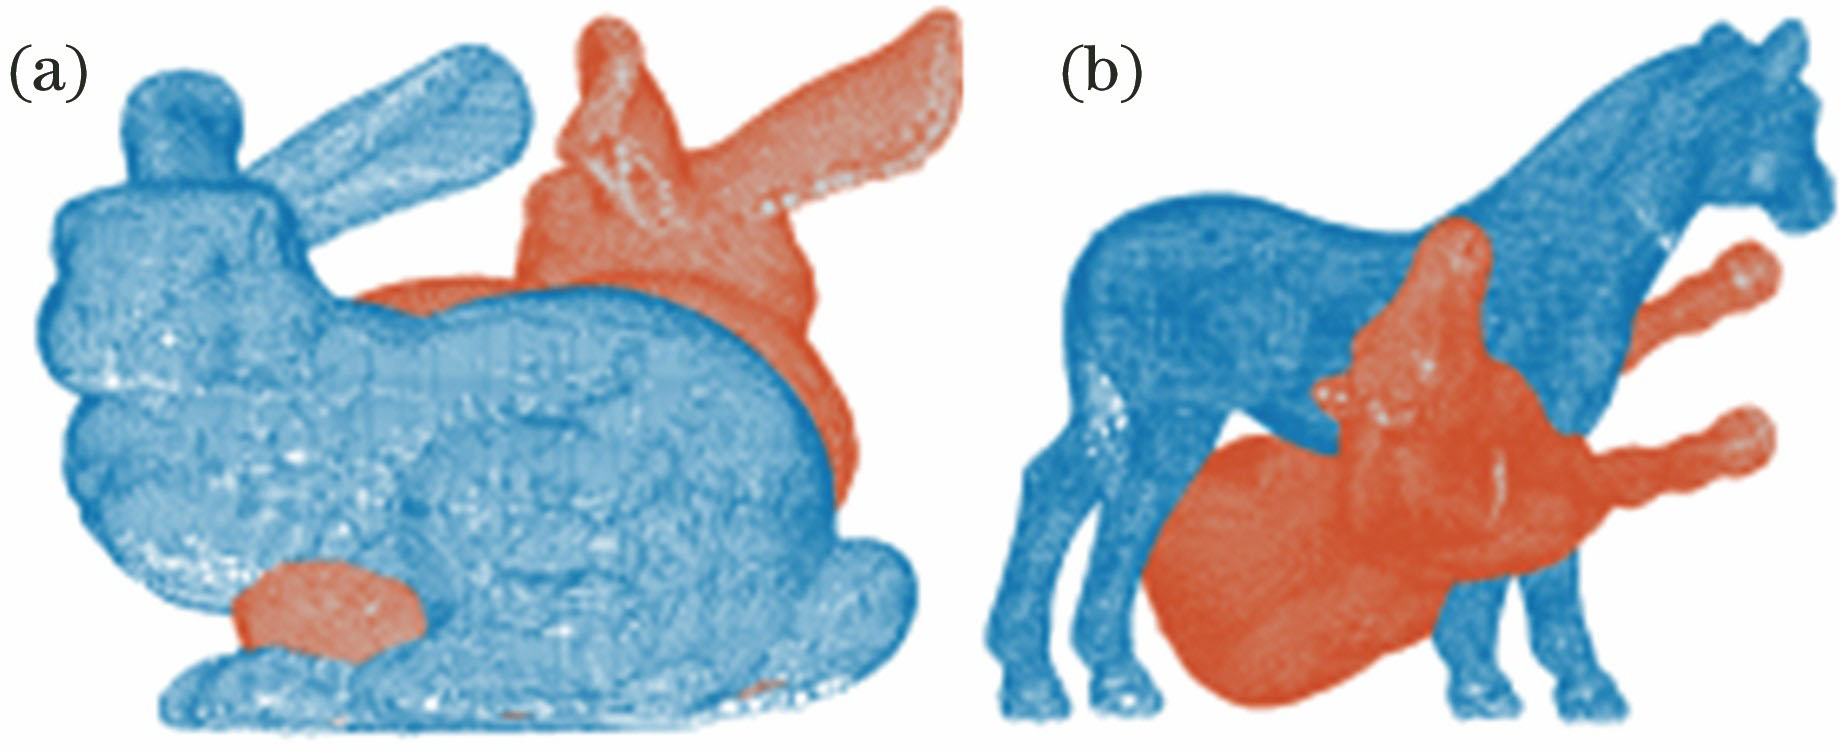 Initial states of point clouds. (a) Bunny; (b) Horse